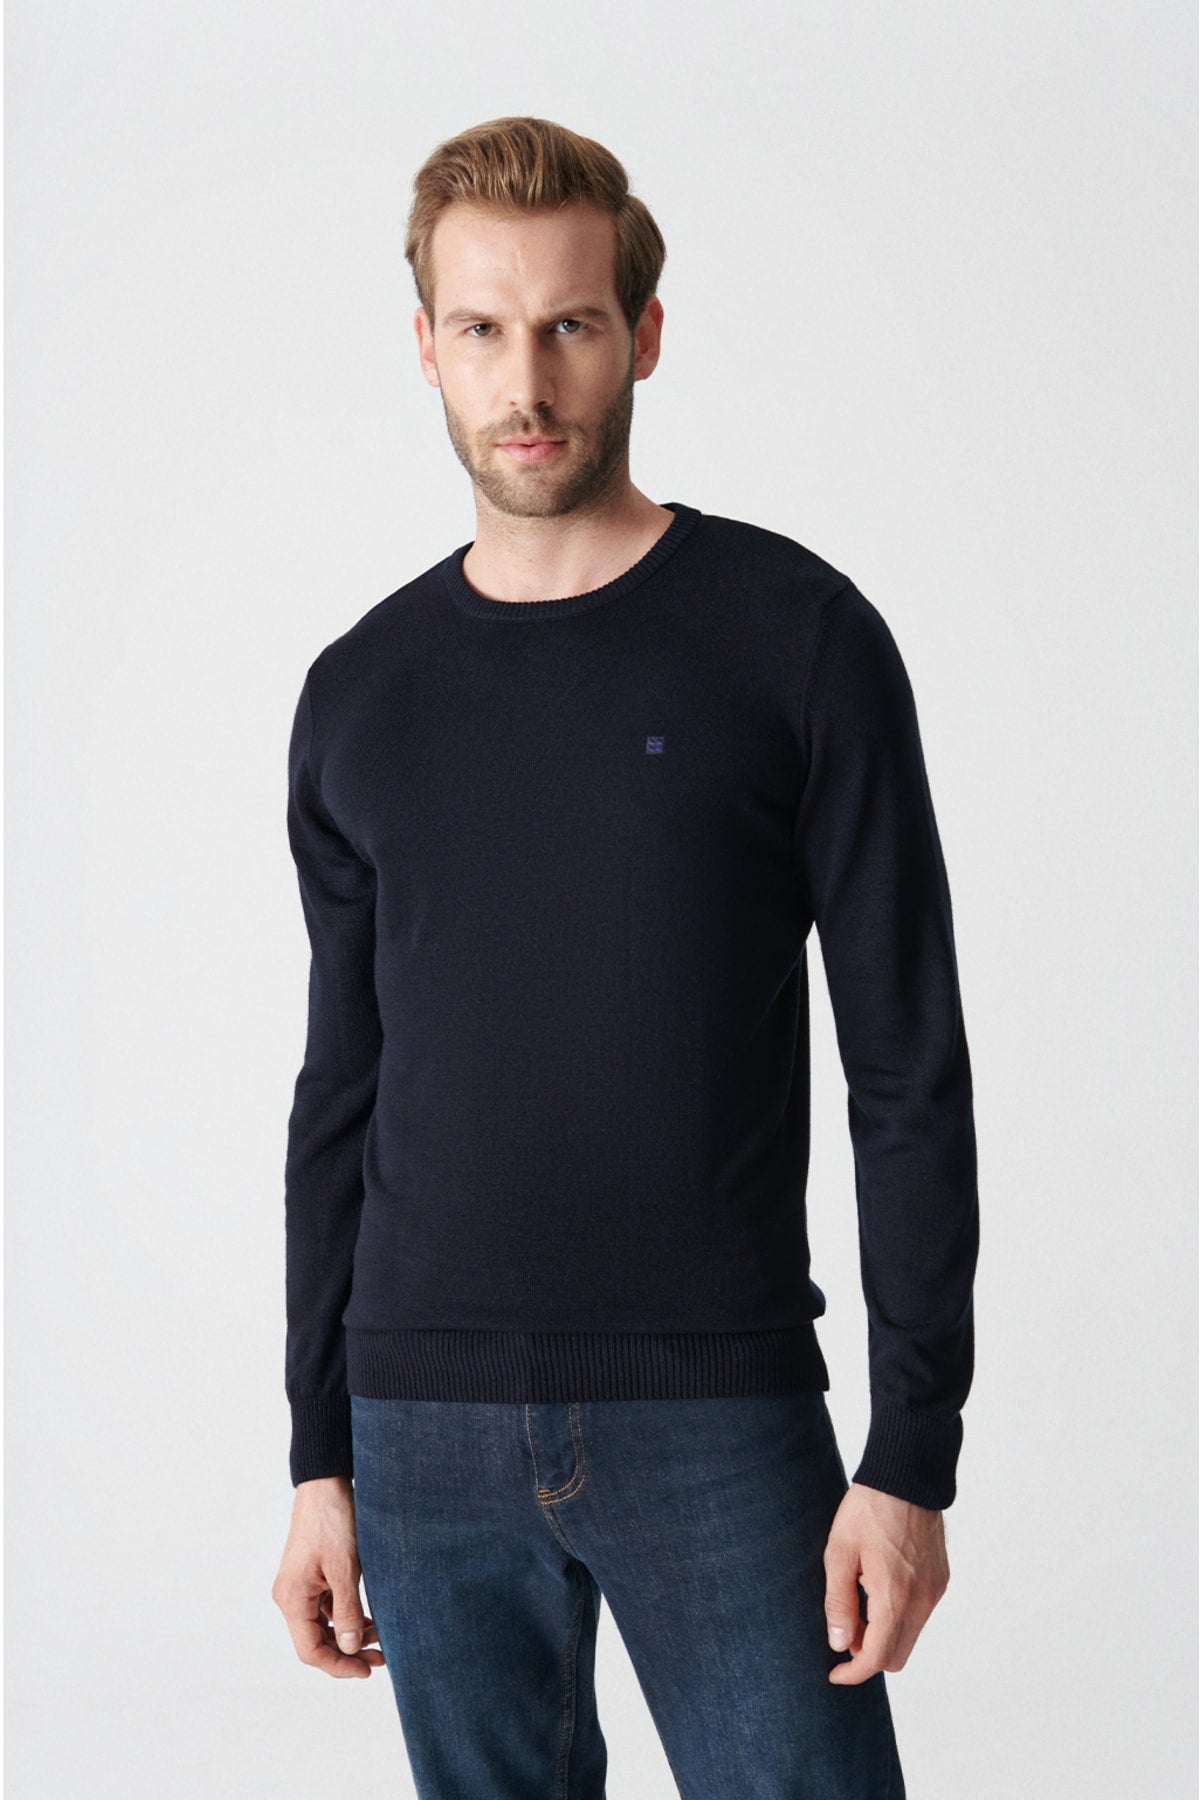 Men's navy blue bicycle collar regular non -hairy fit sweater E005000